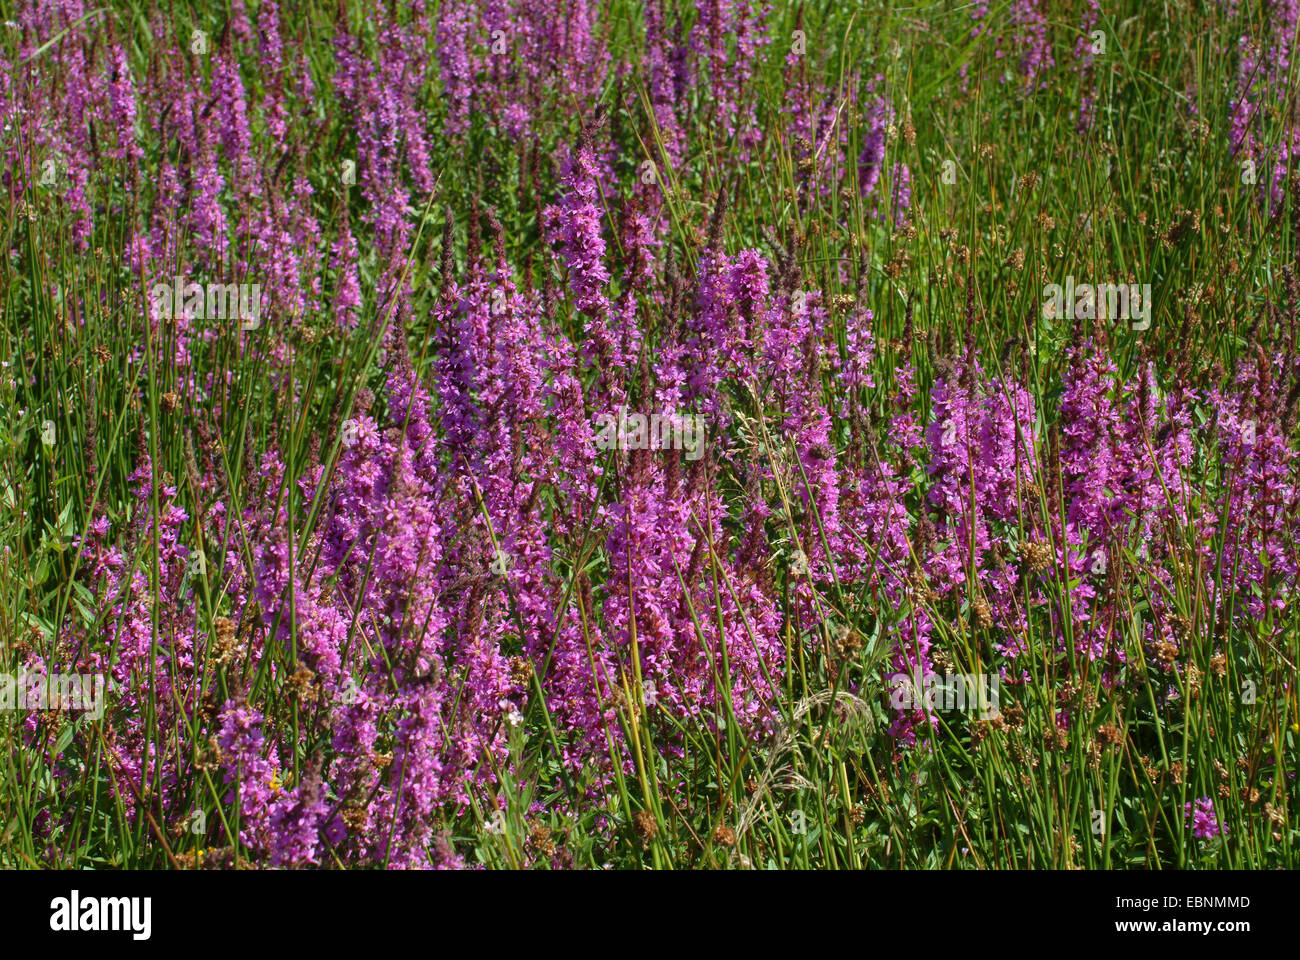 purple loosestrife, spiked loosestrife (Lythrum salicaria), many purple loosestrifes in wetland, Germany Stock Photo